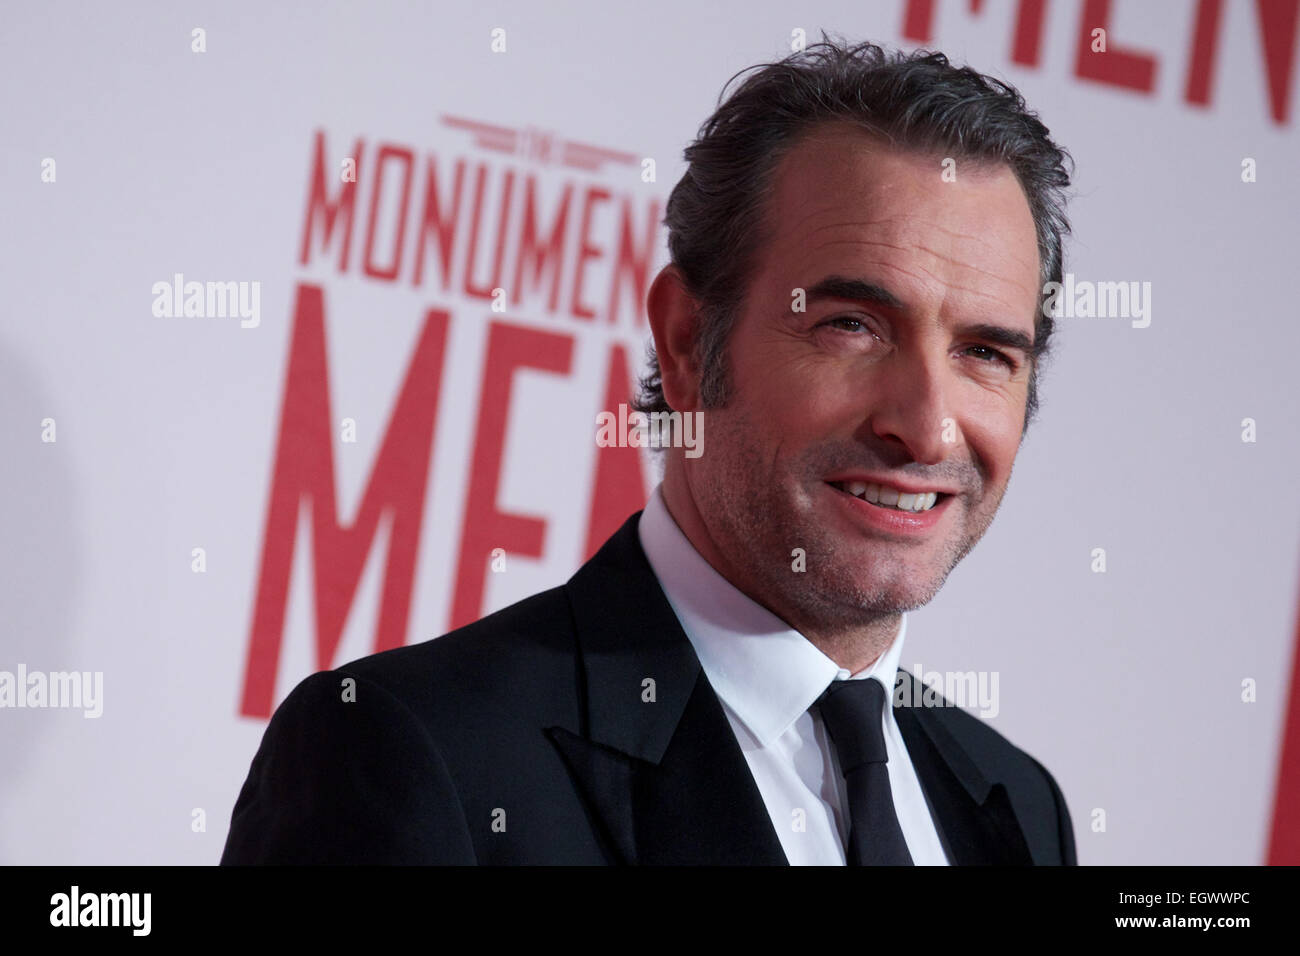 UNITED KINGDOM, London : French actor Jean Dujardin poses for a photo call in front of 'Cupid complaining to Venus' by Lucas Cranach which was a painting that belonged in Hitlers private collection, in conjunction with the film 'The Monument men' in central London on February 11, 2014 Stock Photo